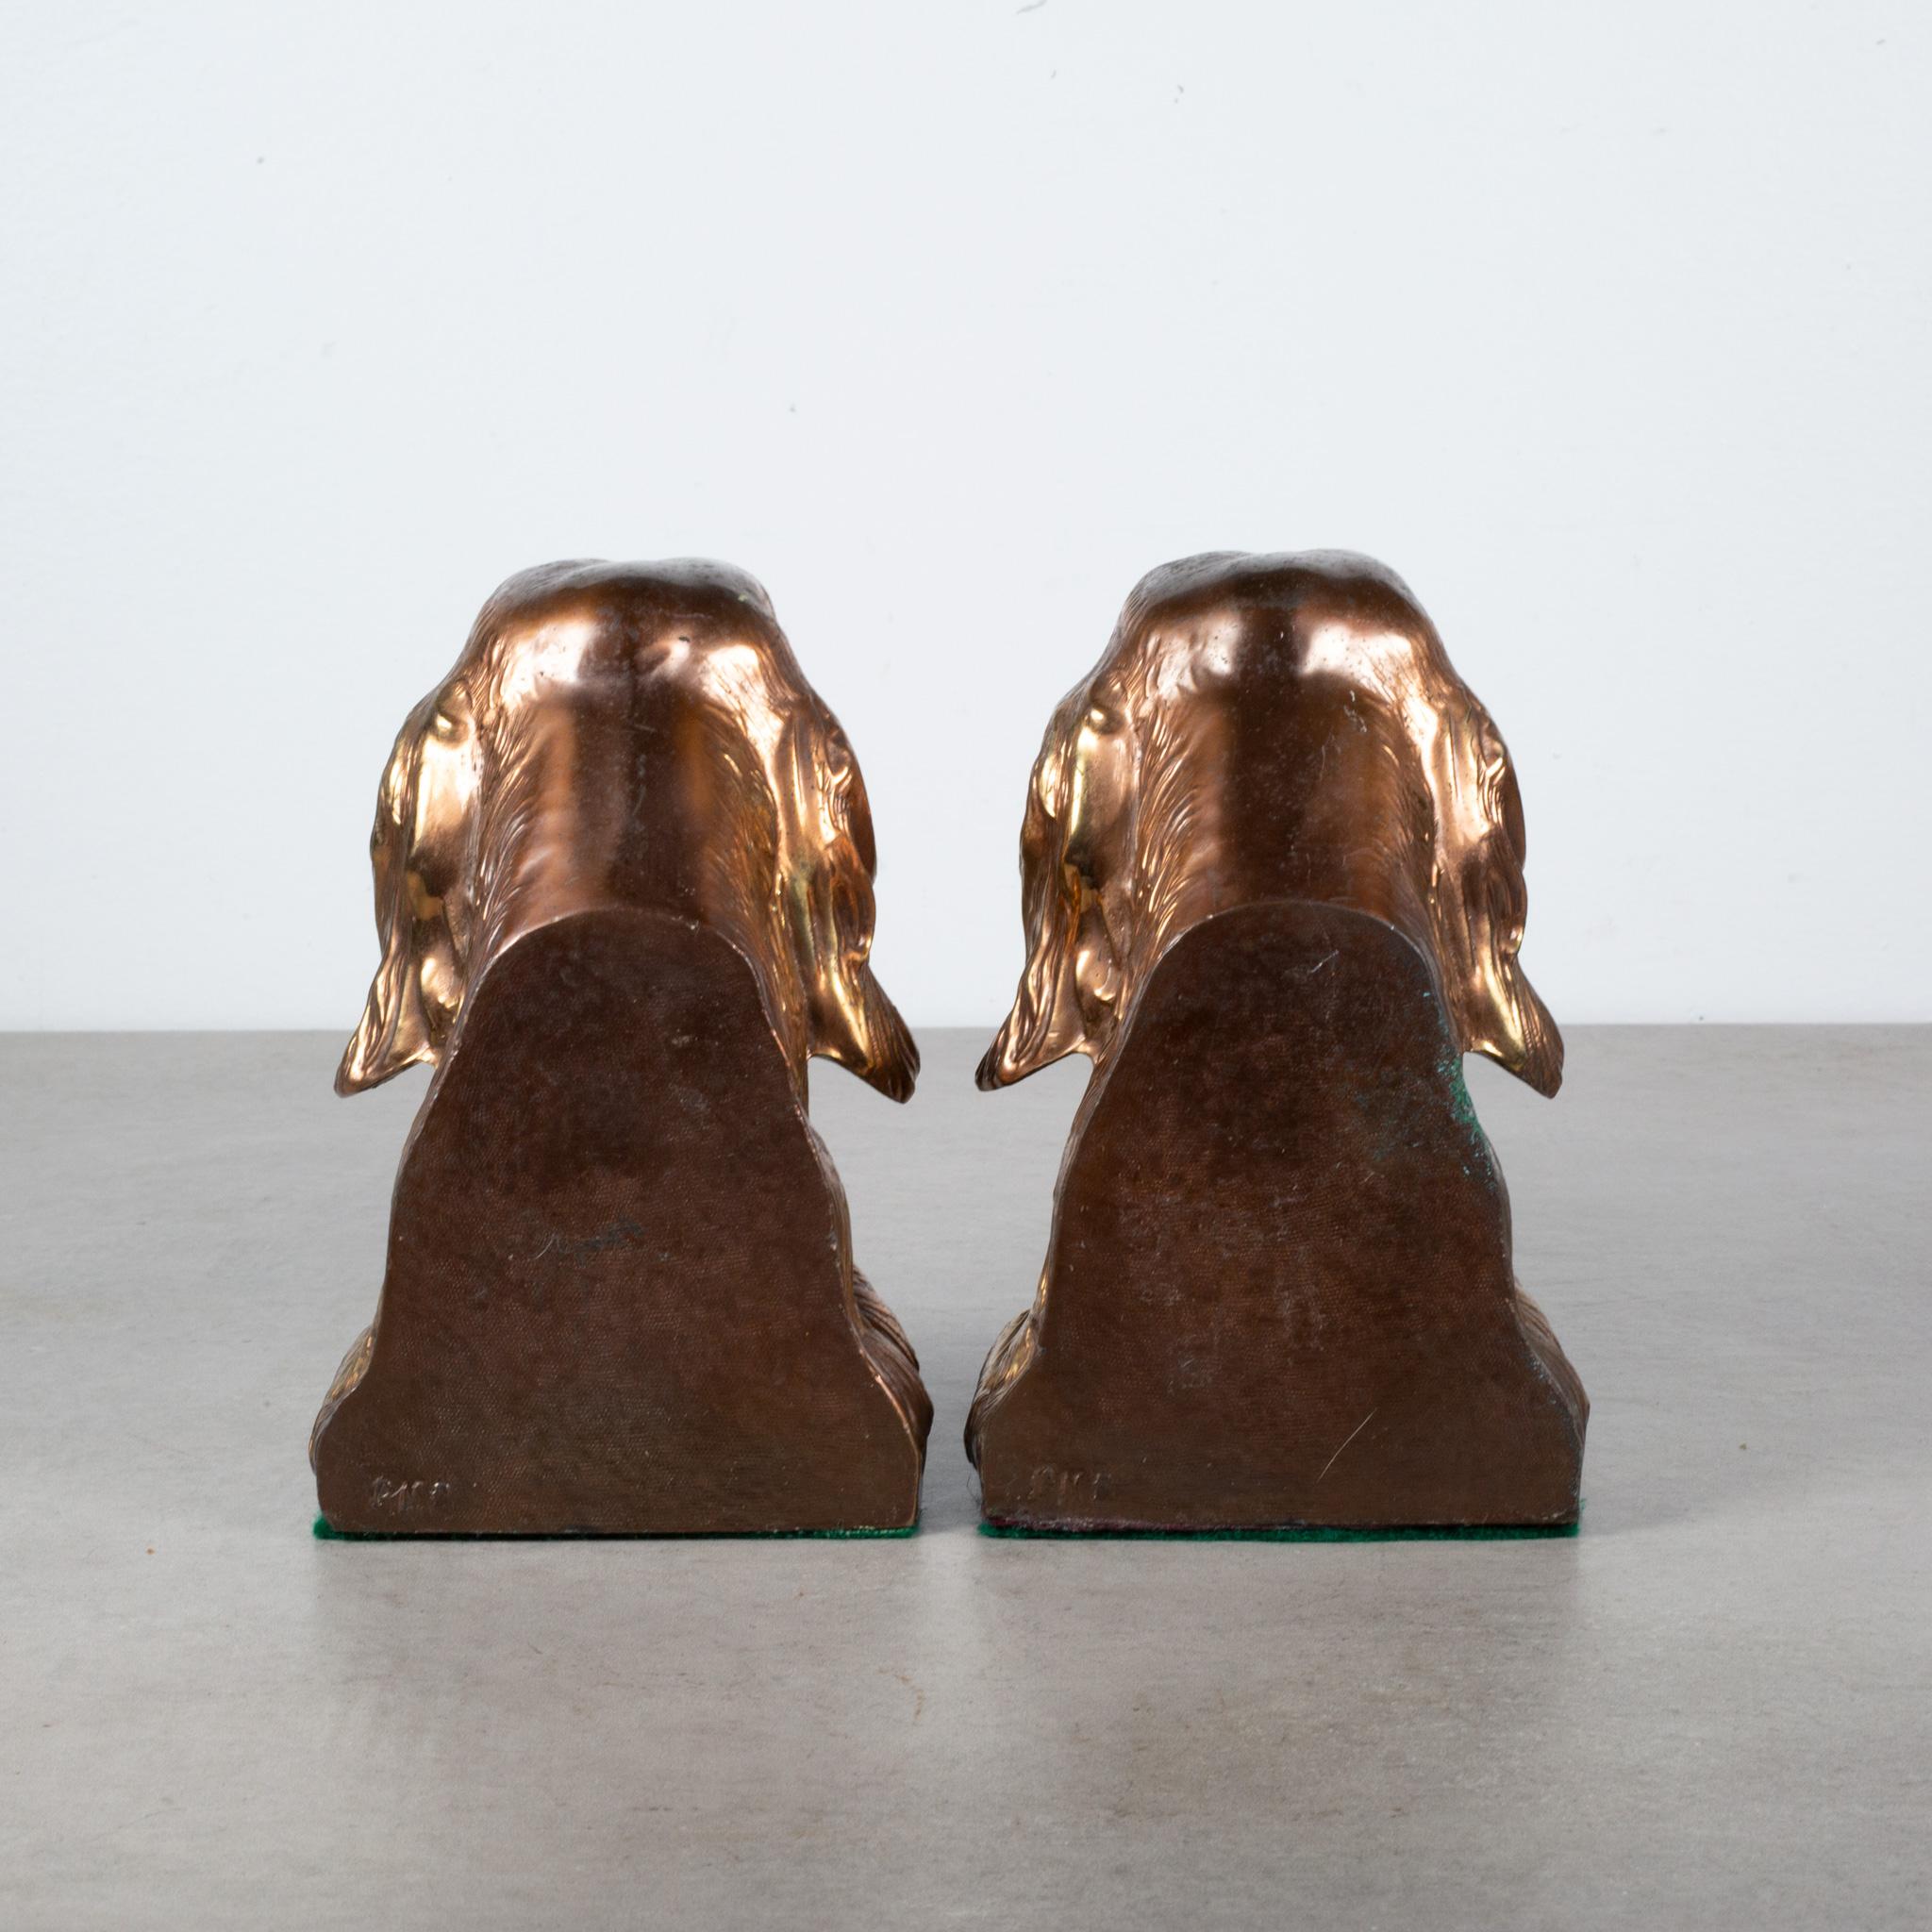 Bronze-Plated Dog Bookends, circa 1940  (FREE SHIPPING) In Good Condition For Sale In San Francisco, CA